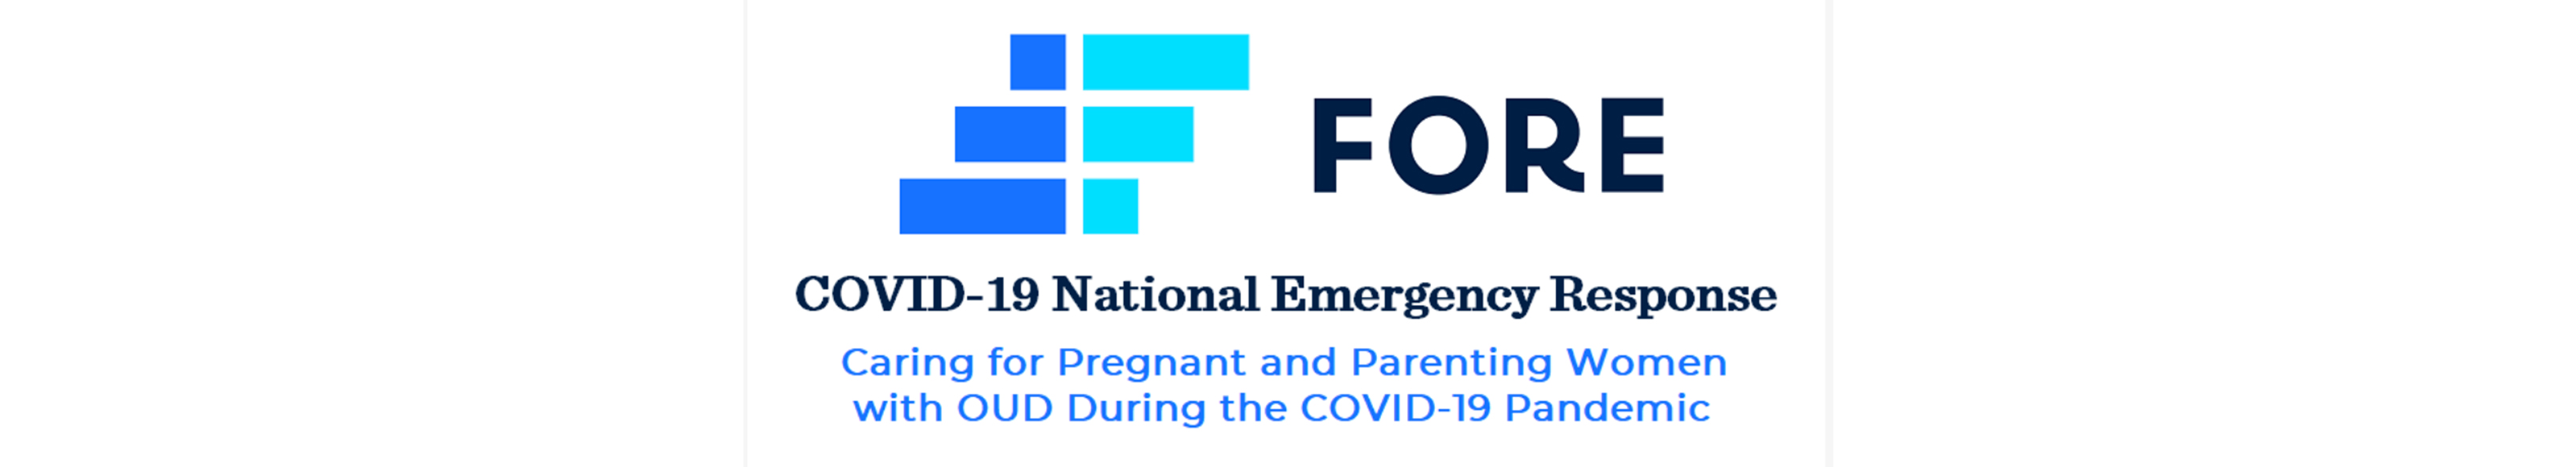 Caring for Pregnant and Parenting Women with OUD During the COVID-19 Pandemic